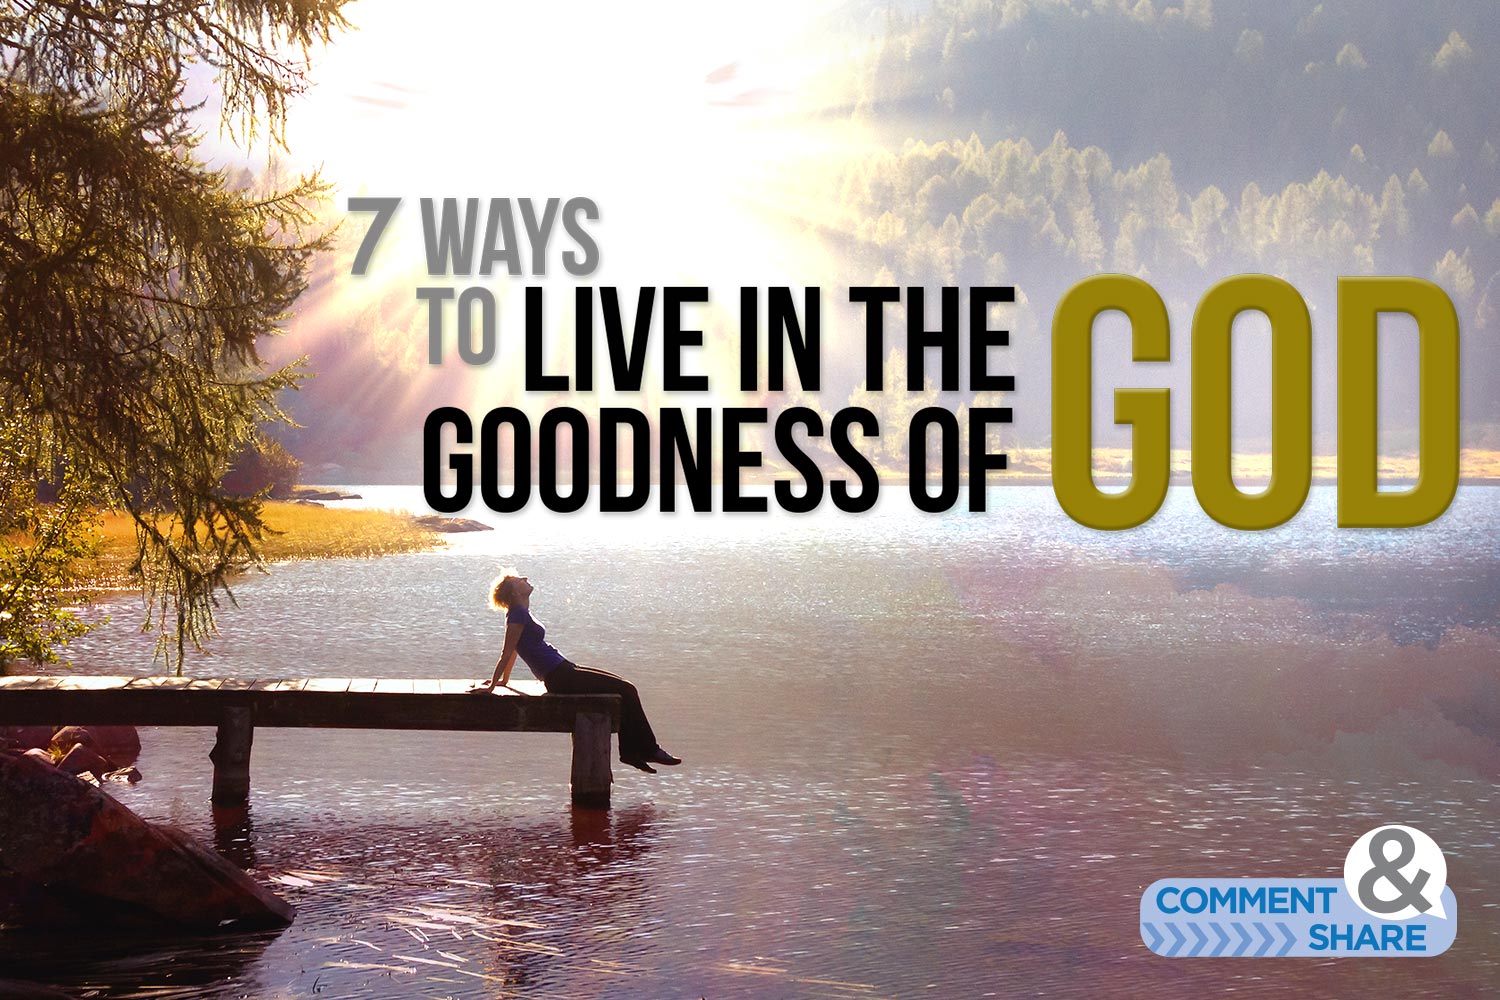 7 Ways to Live in the Goodness of God